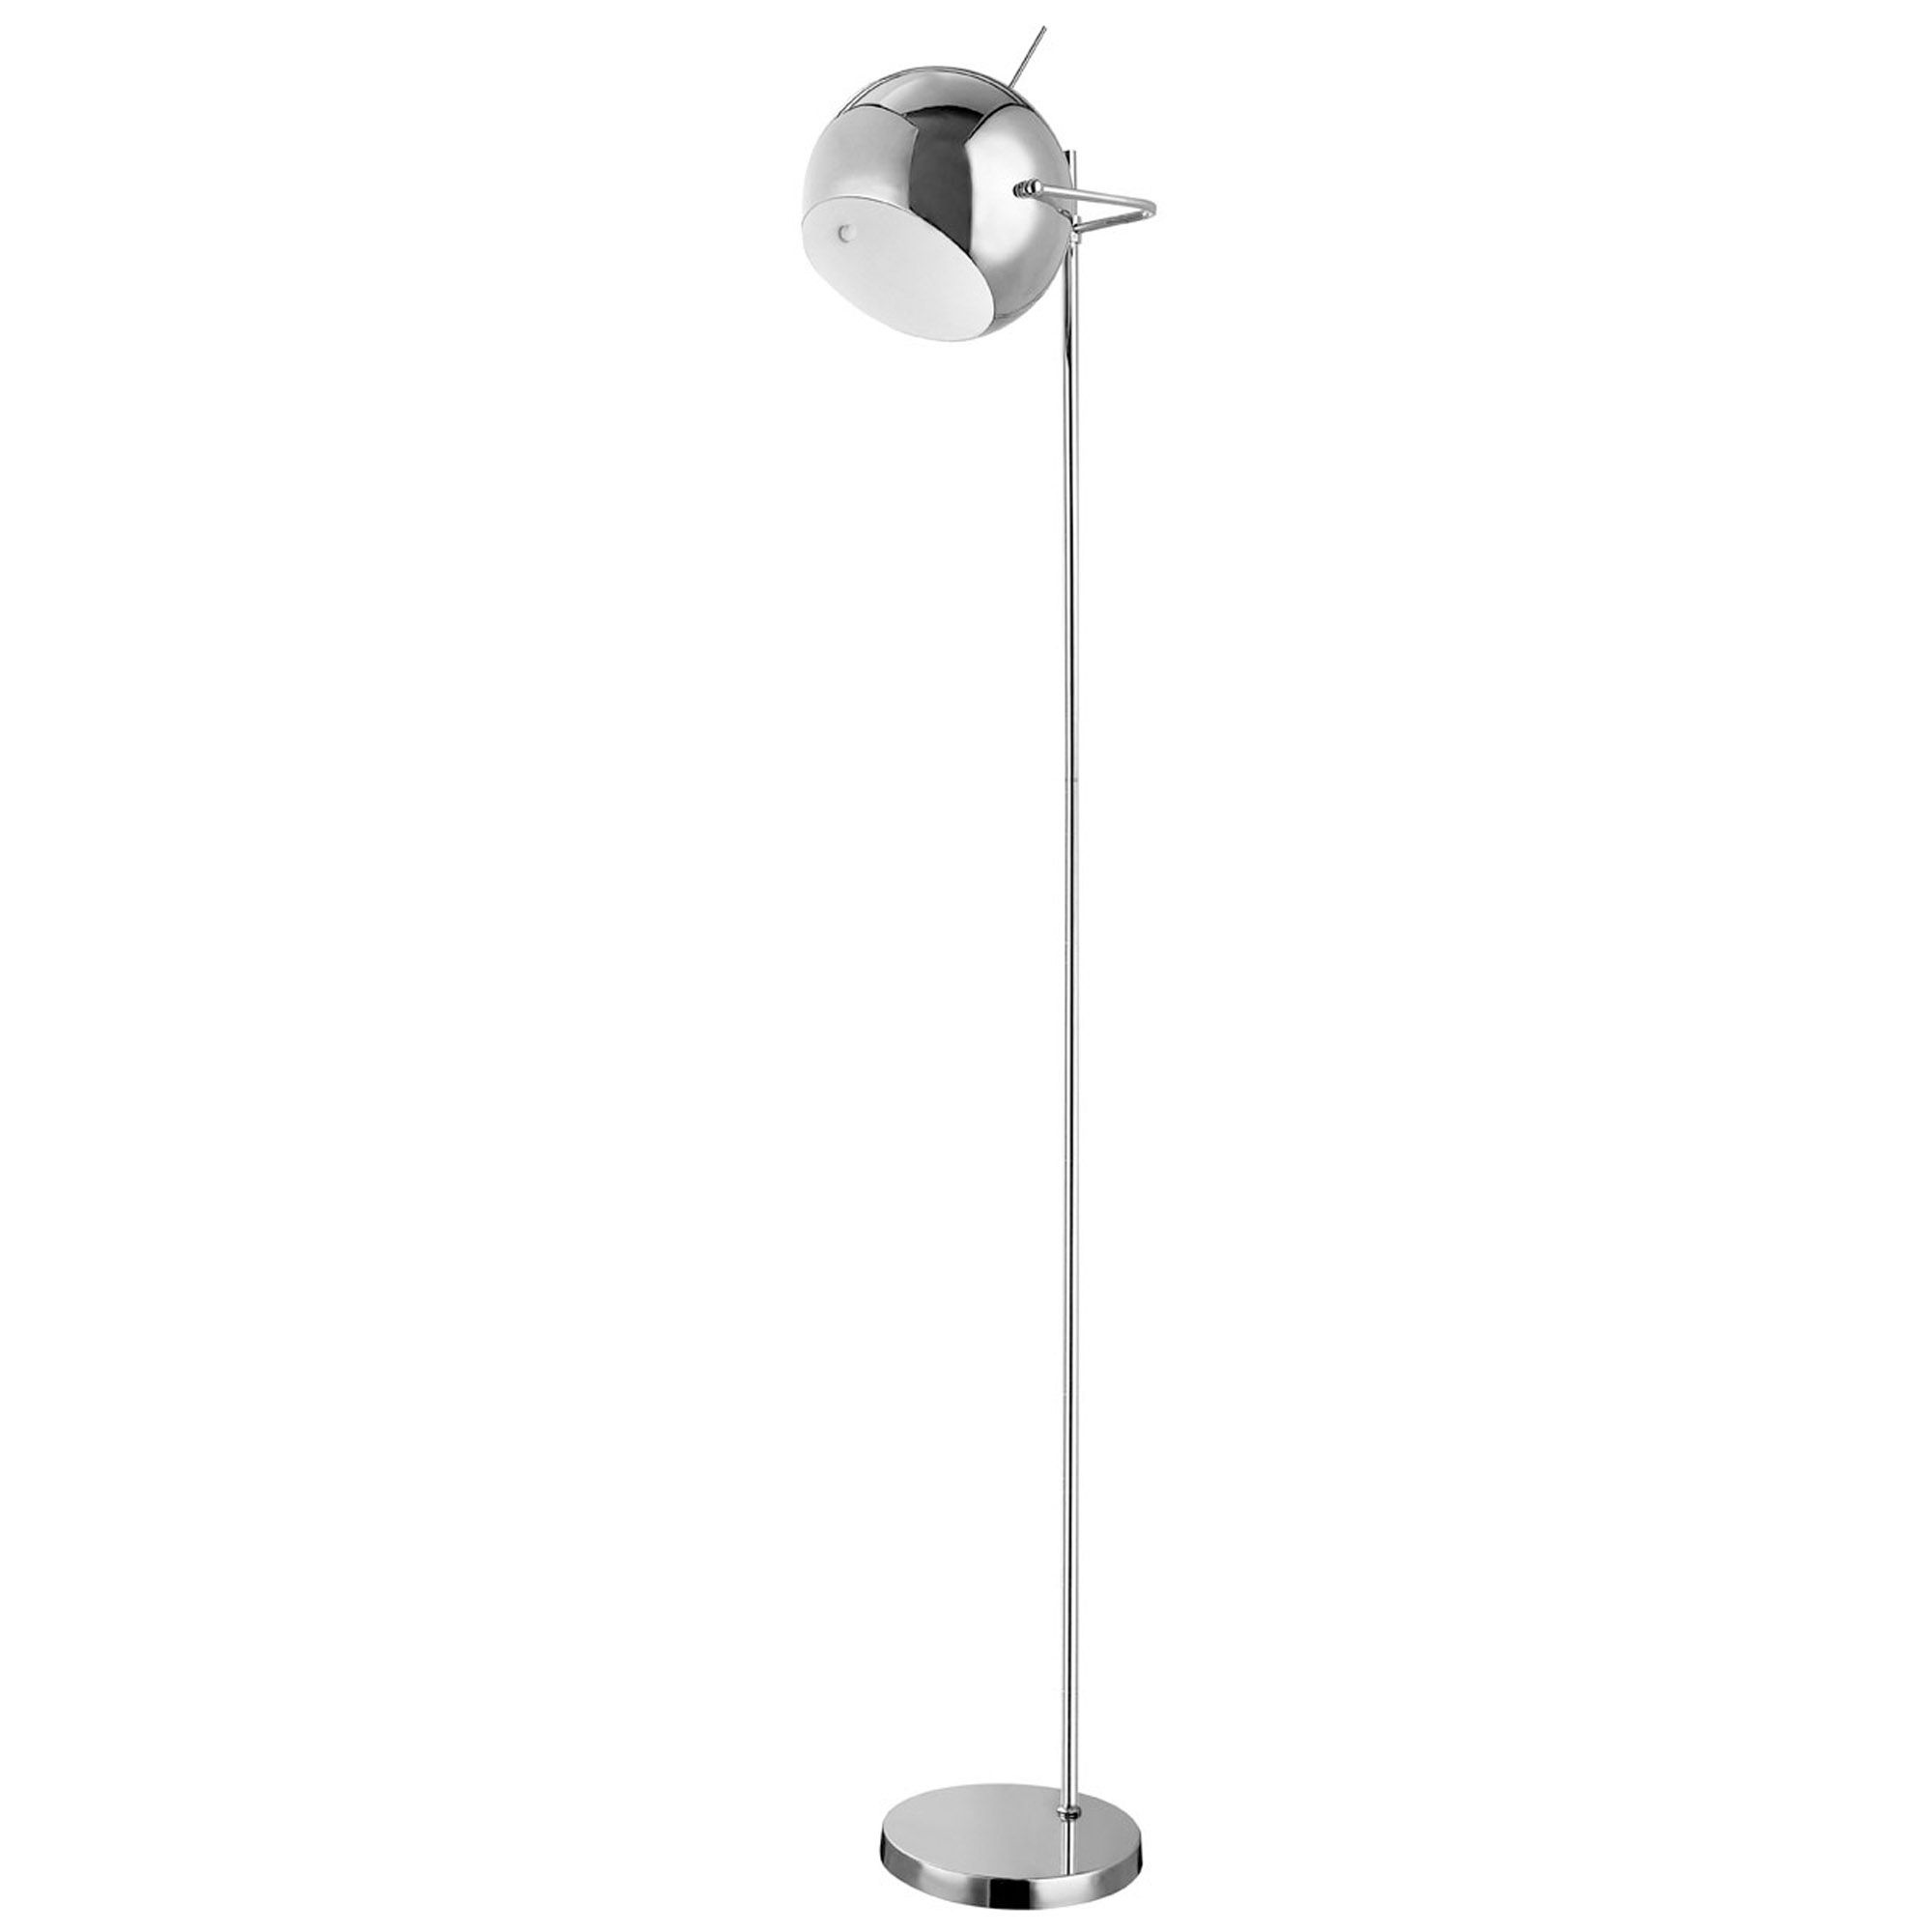 Silver Floor Lamp | Industrial Lighting | Homesdirect365 With Silver Floor Lamps (View 6 of 20)